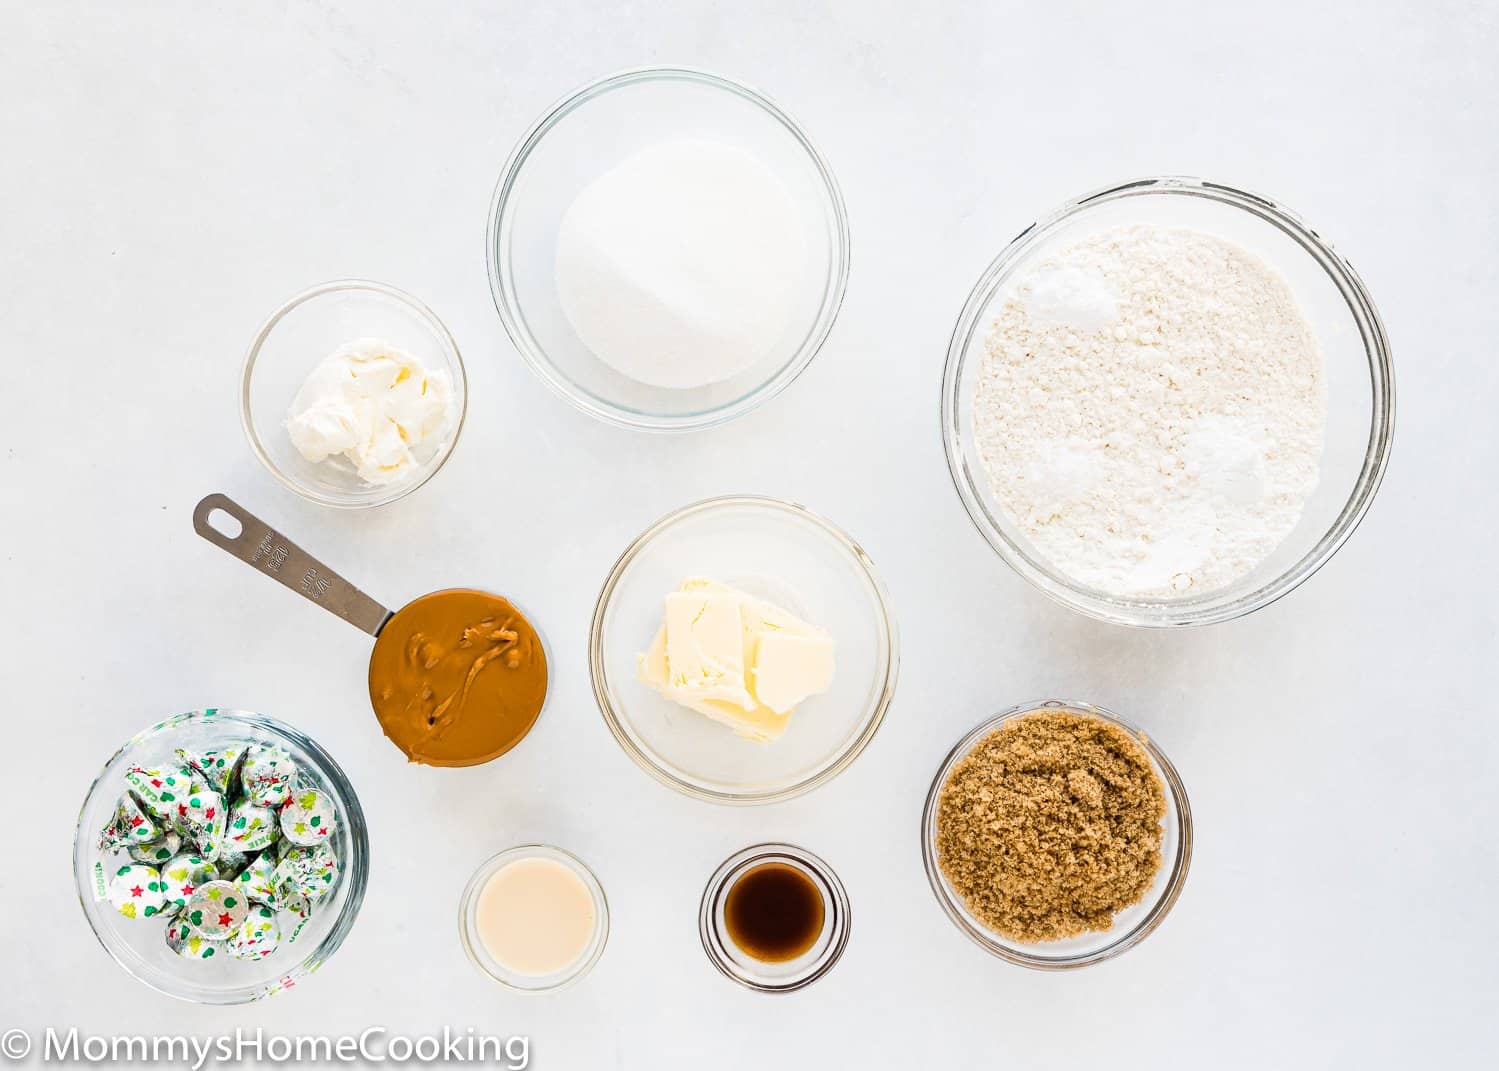 ingredients to make Peanut Butter Blossom Cookies without eggs